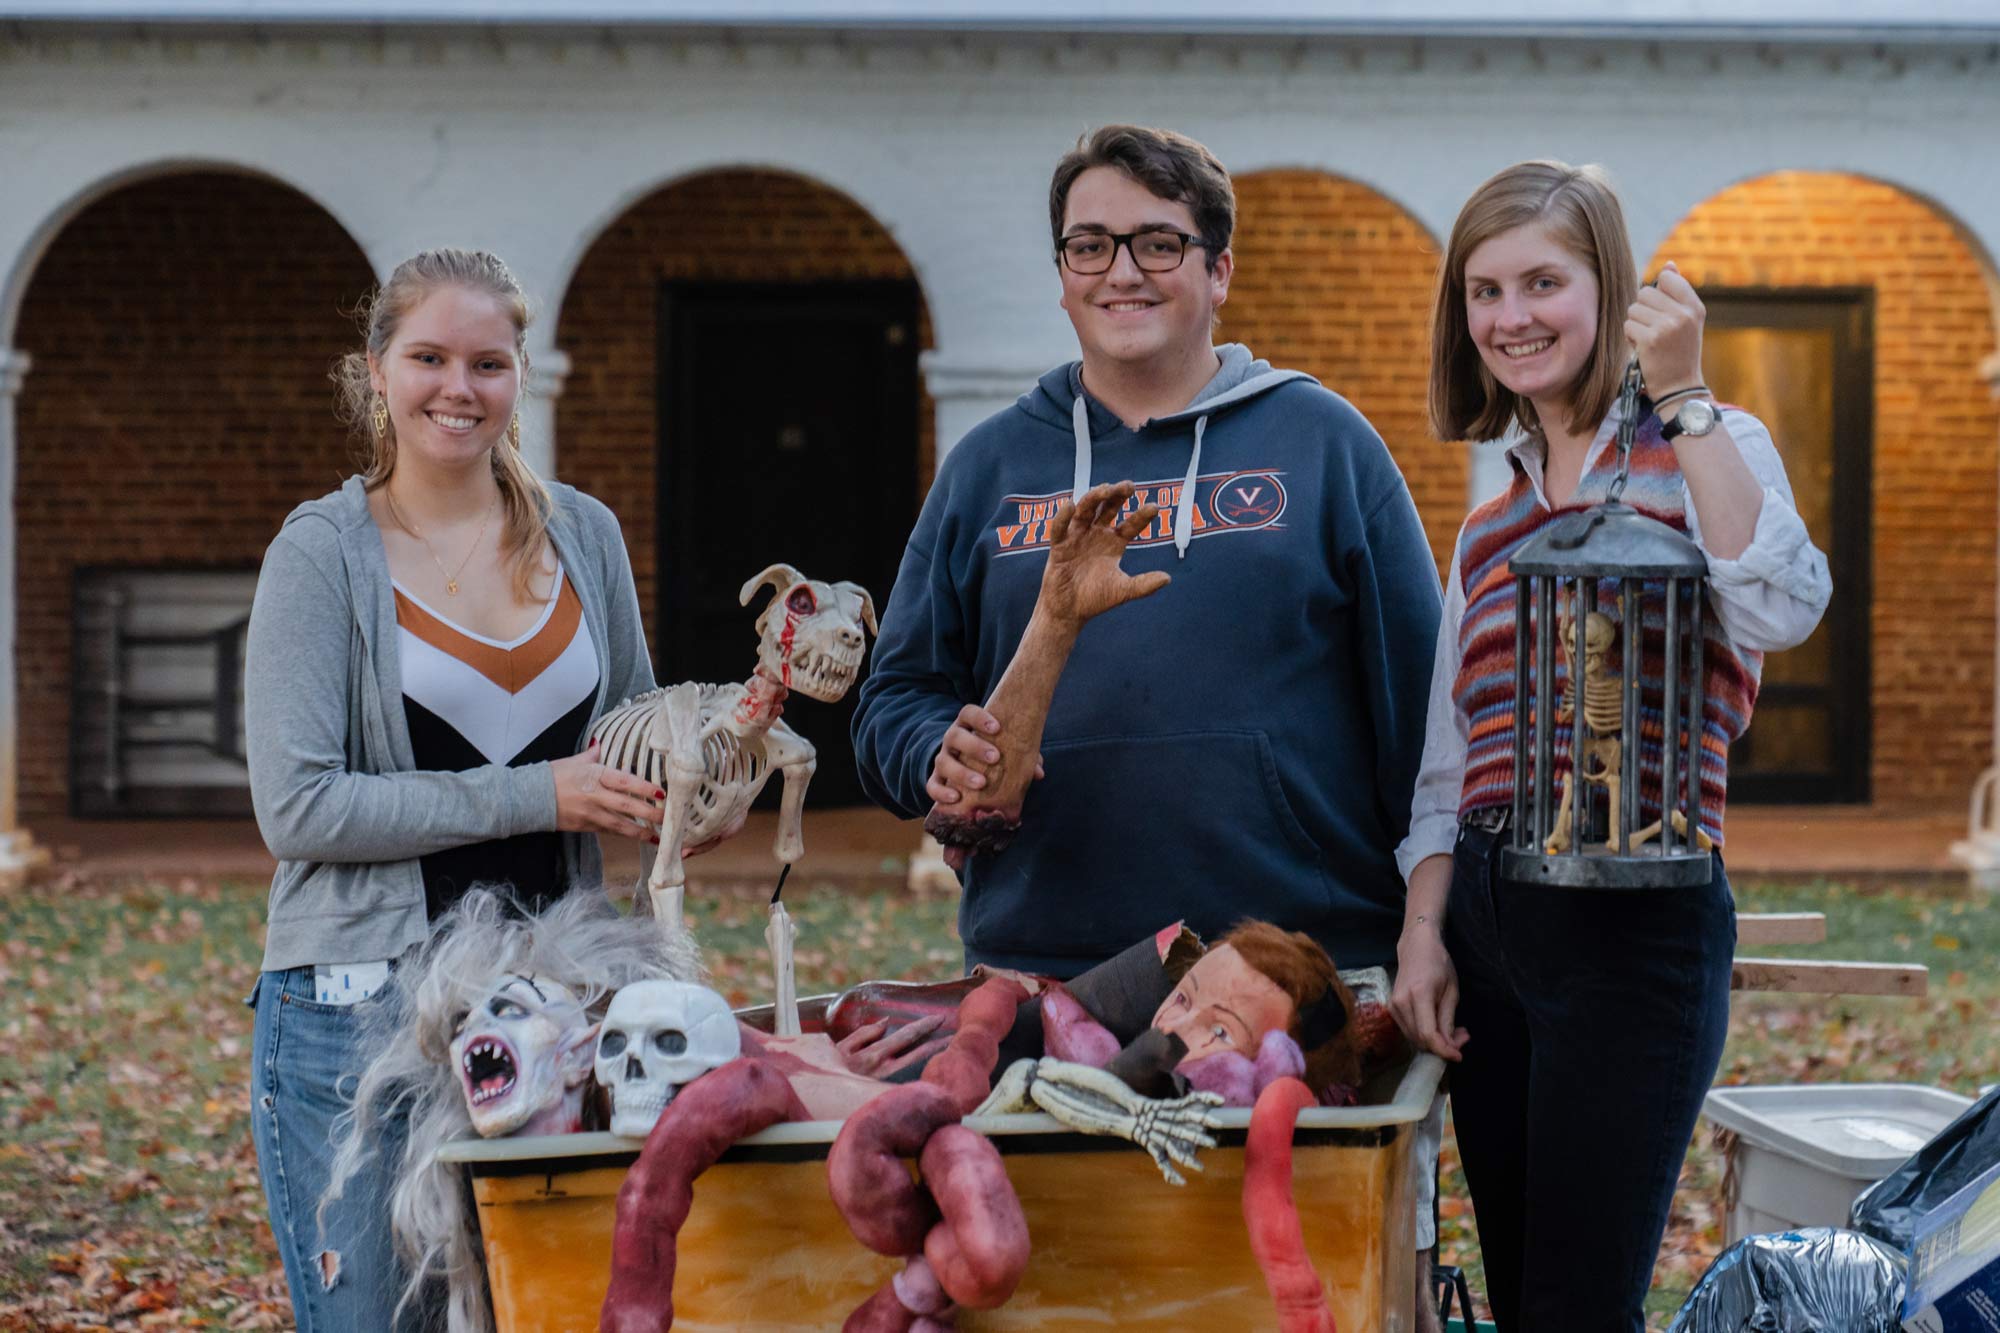 Group photo of three people holding spooky props for the haunted house